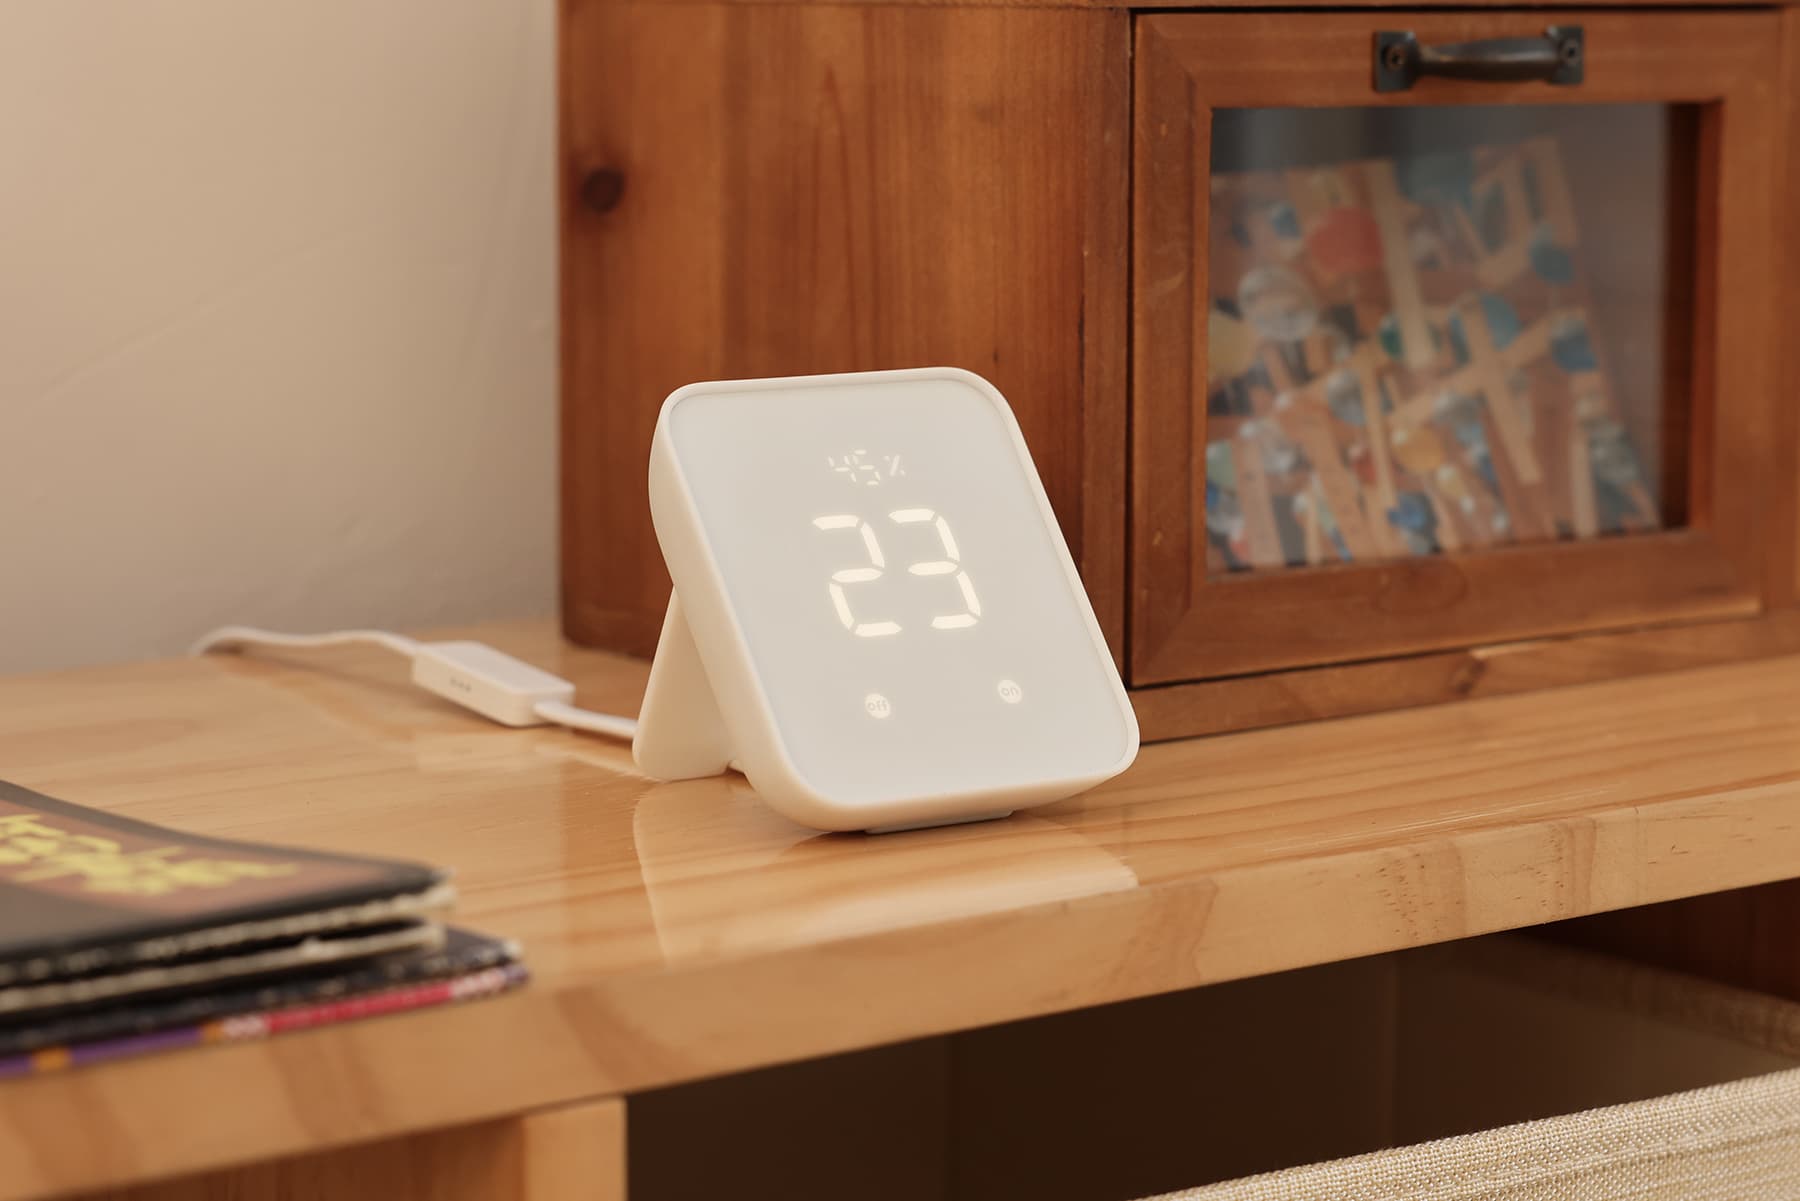 Nordic-powered Smart Home Hub delivers complete home ecosystem